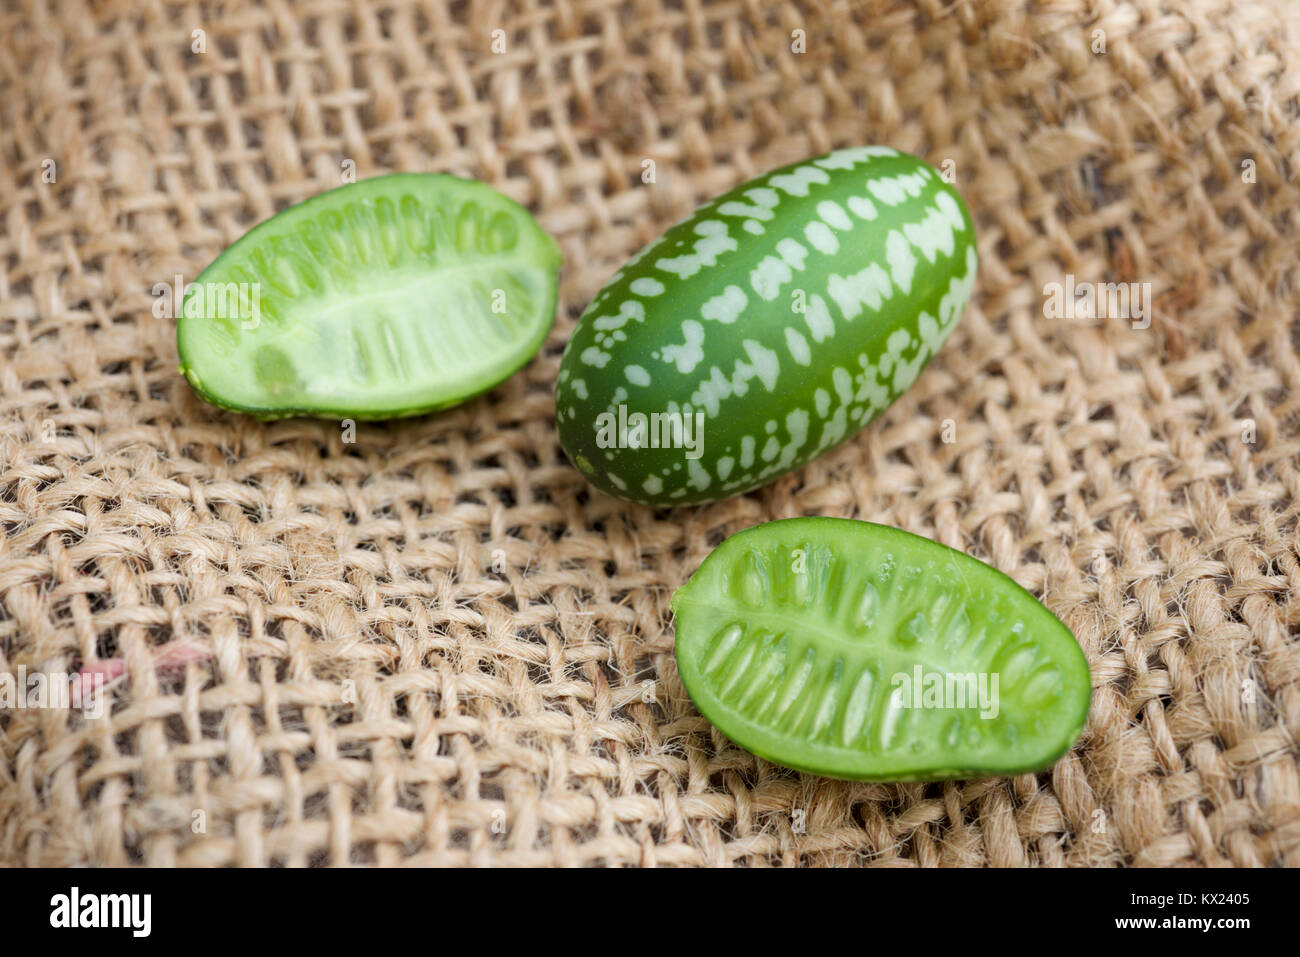 Cucamelon fruit, also known as Mexican gherkins, Mexican sour cucumbers, or Melothria Scabra on a hessian, burlap sack background, whole and cut fruit. Stock Photo